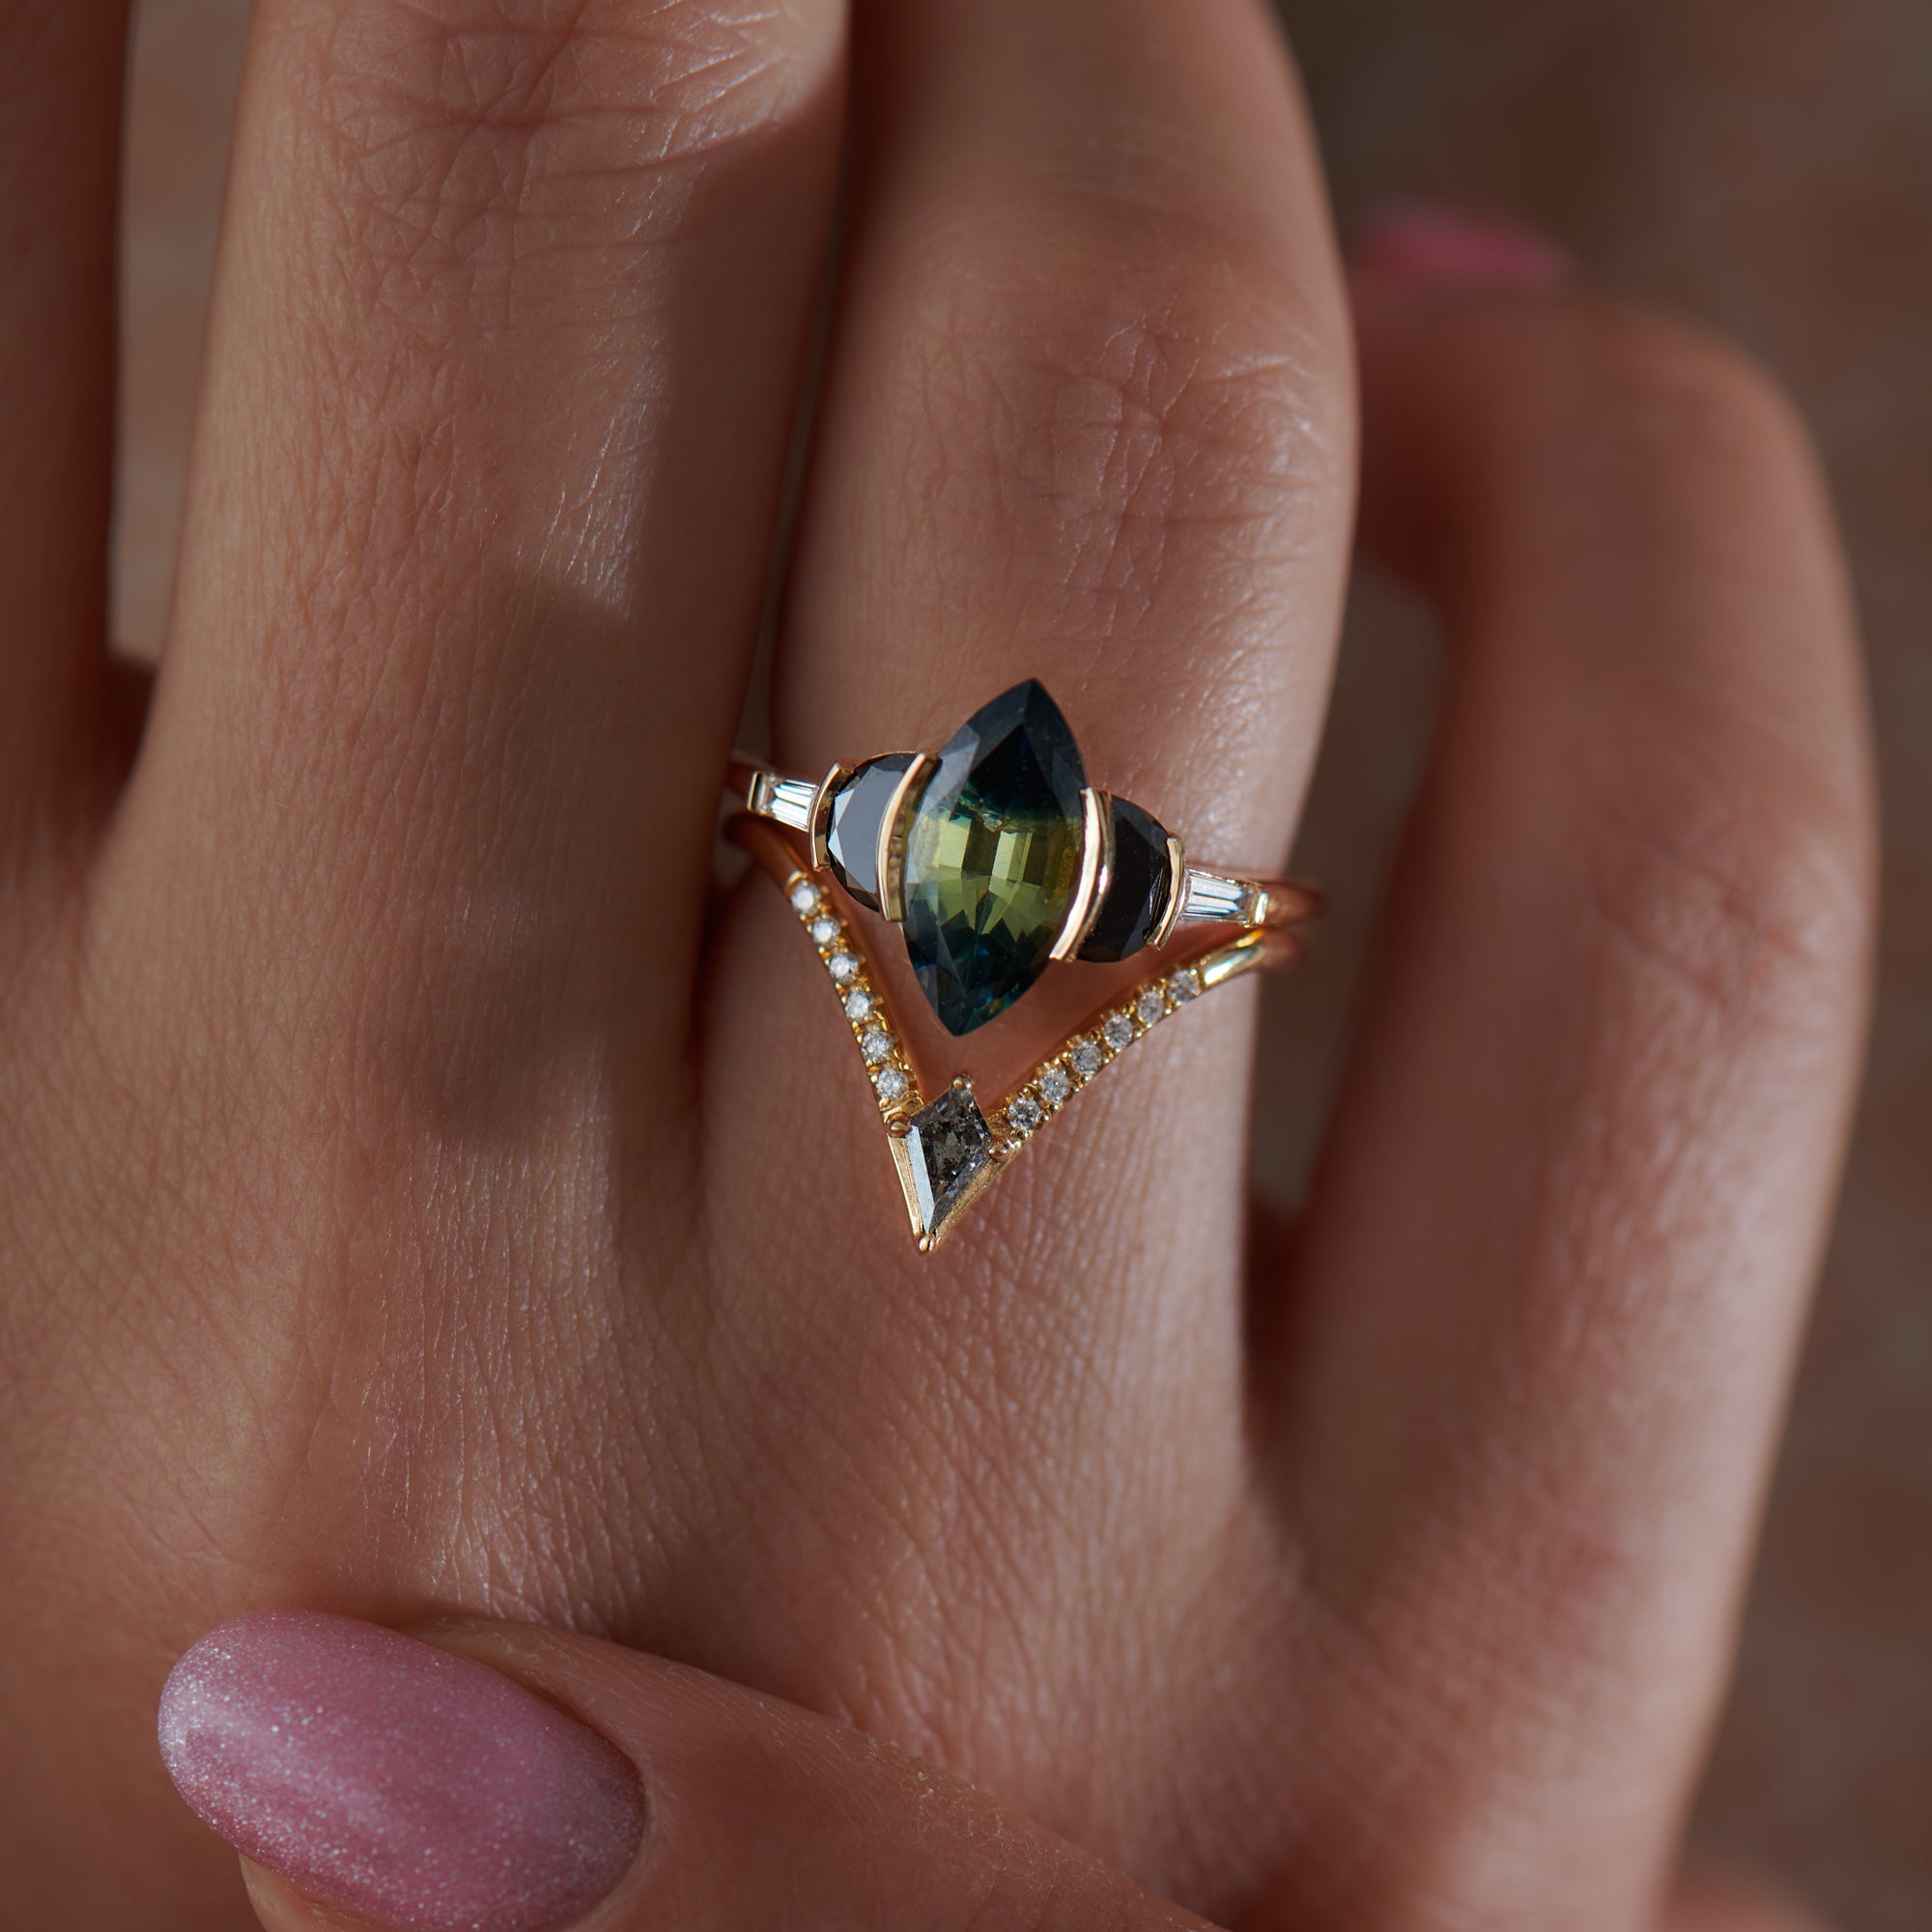 Unique, Black Diamond Engagement Ring | Jewelry by Johan - Jewelry by Johan